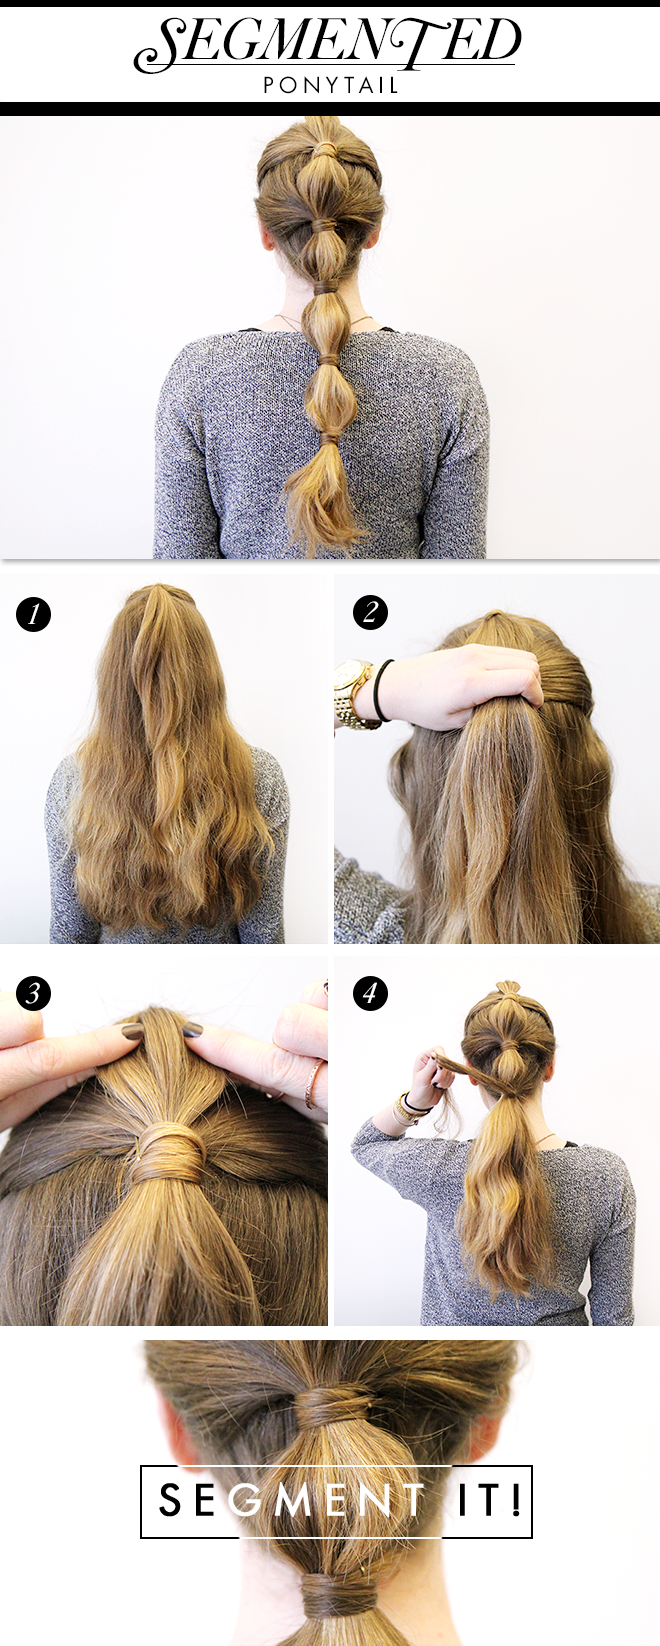 Sectioned Pony - 15 Ways to Make Cute Ponytails